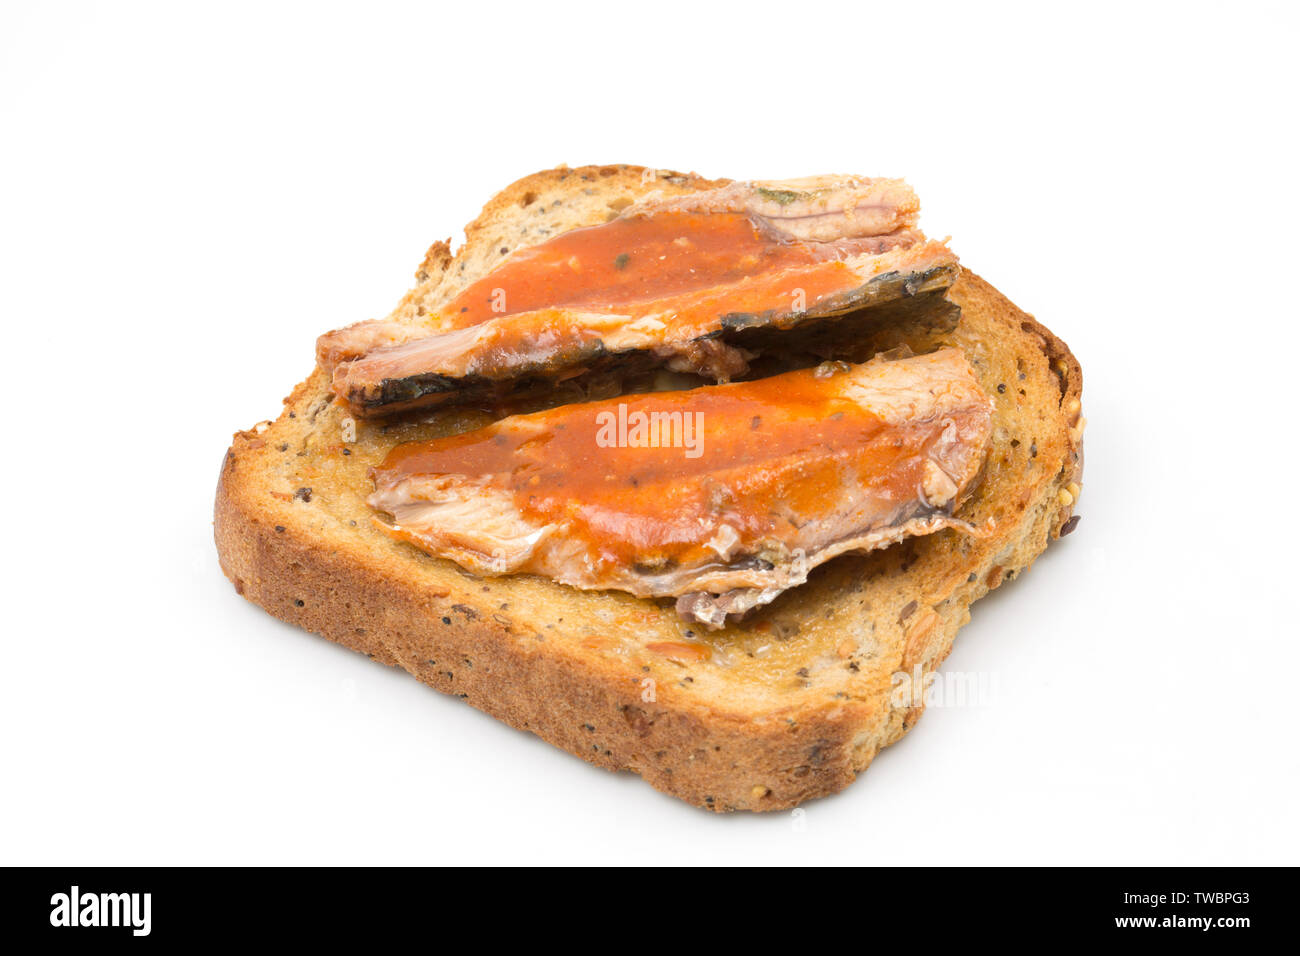 Tinned Asda Smart Price sardines in tomato sauce, caught in the central eastern Atlantic and served on toast. Photographed on a white background. Engl Stock Photo